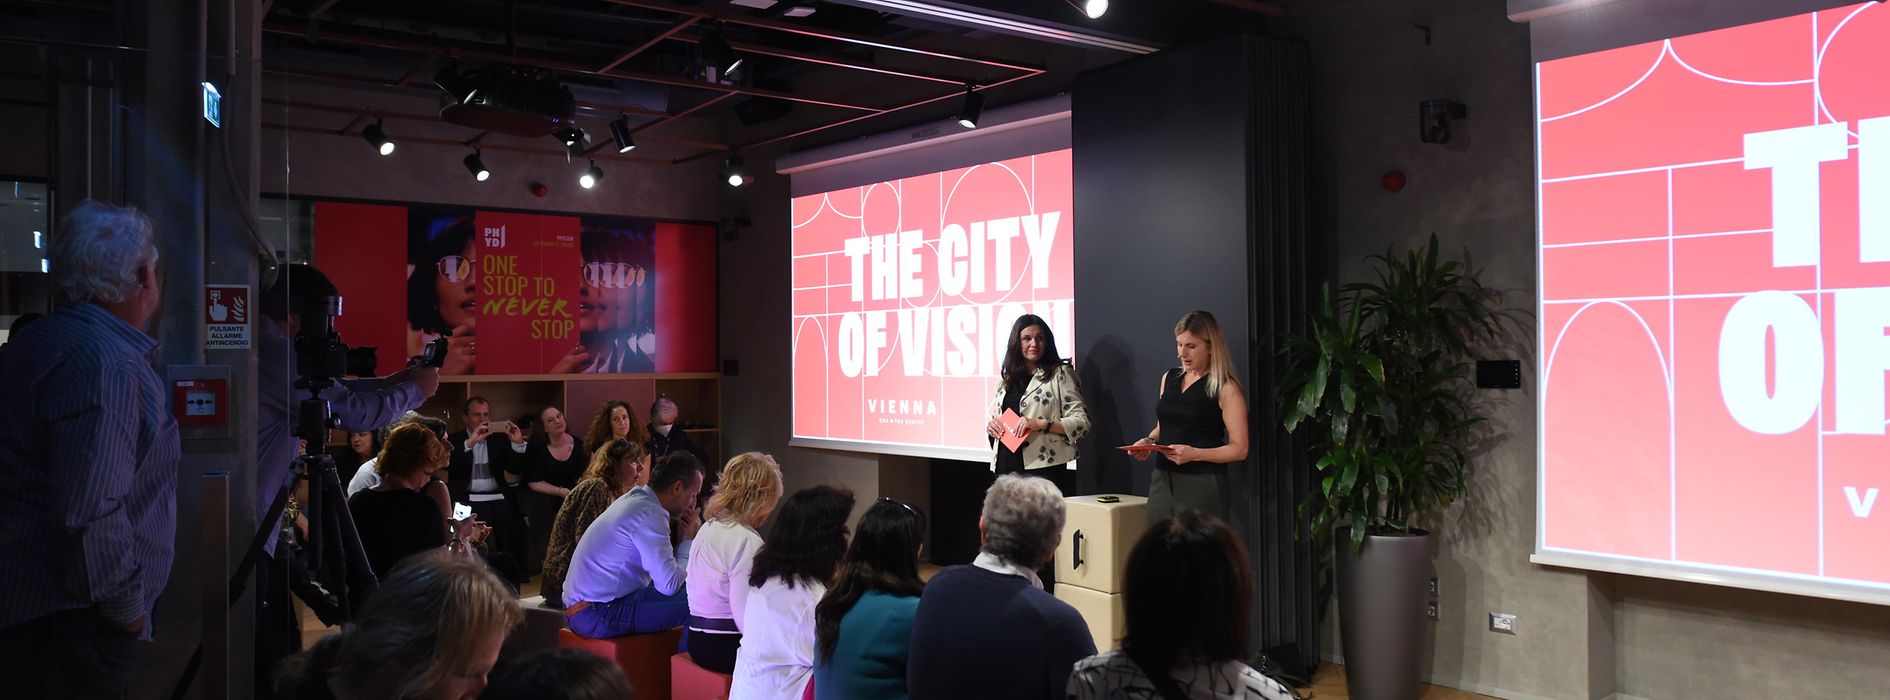 Presentation of The City of Vision at the B2B Highlight Event in Milan